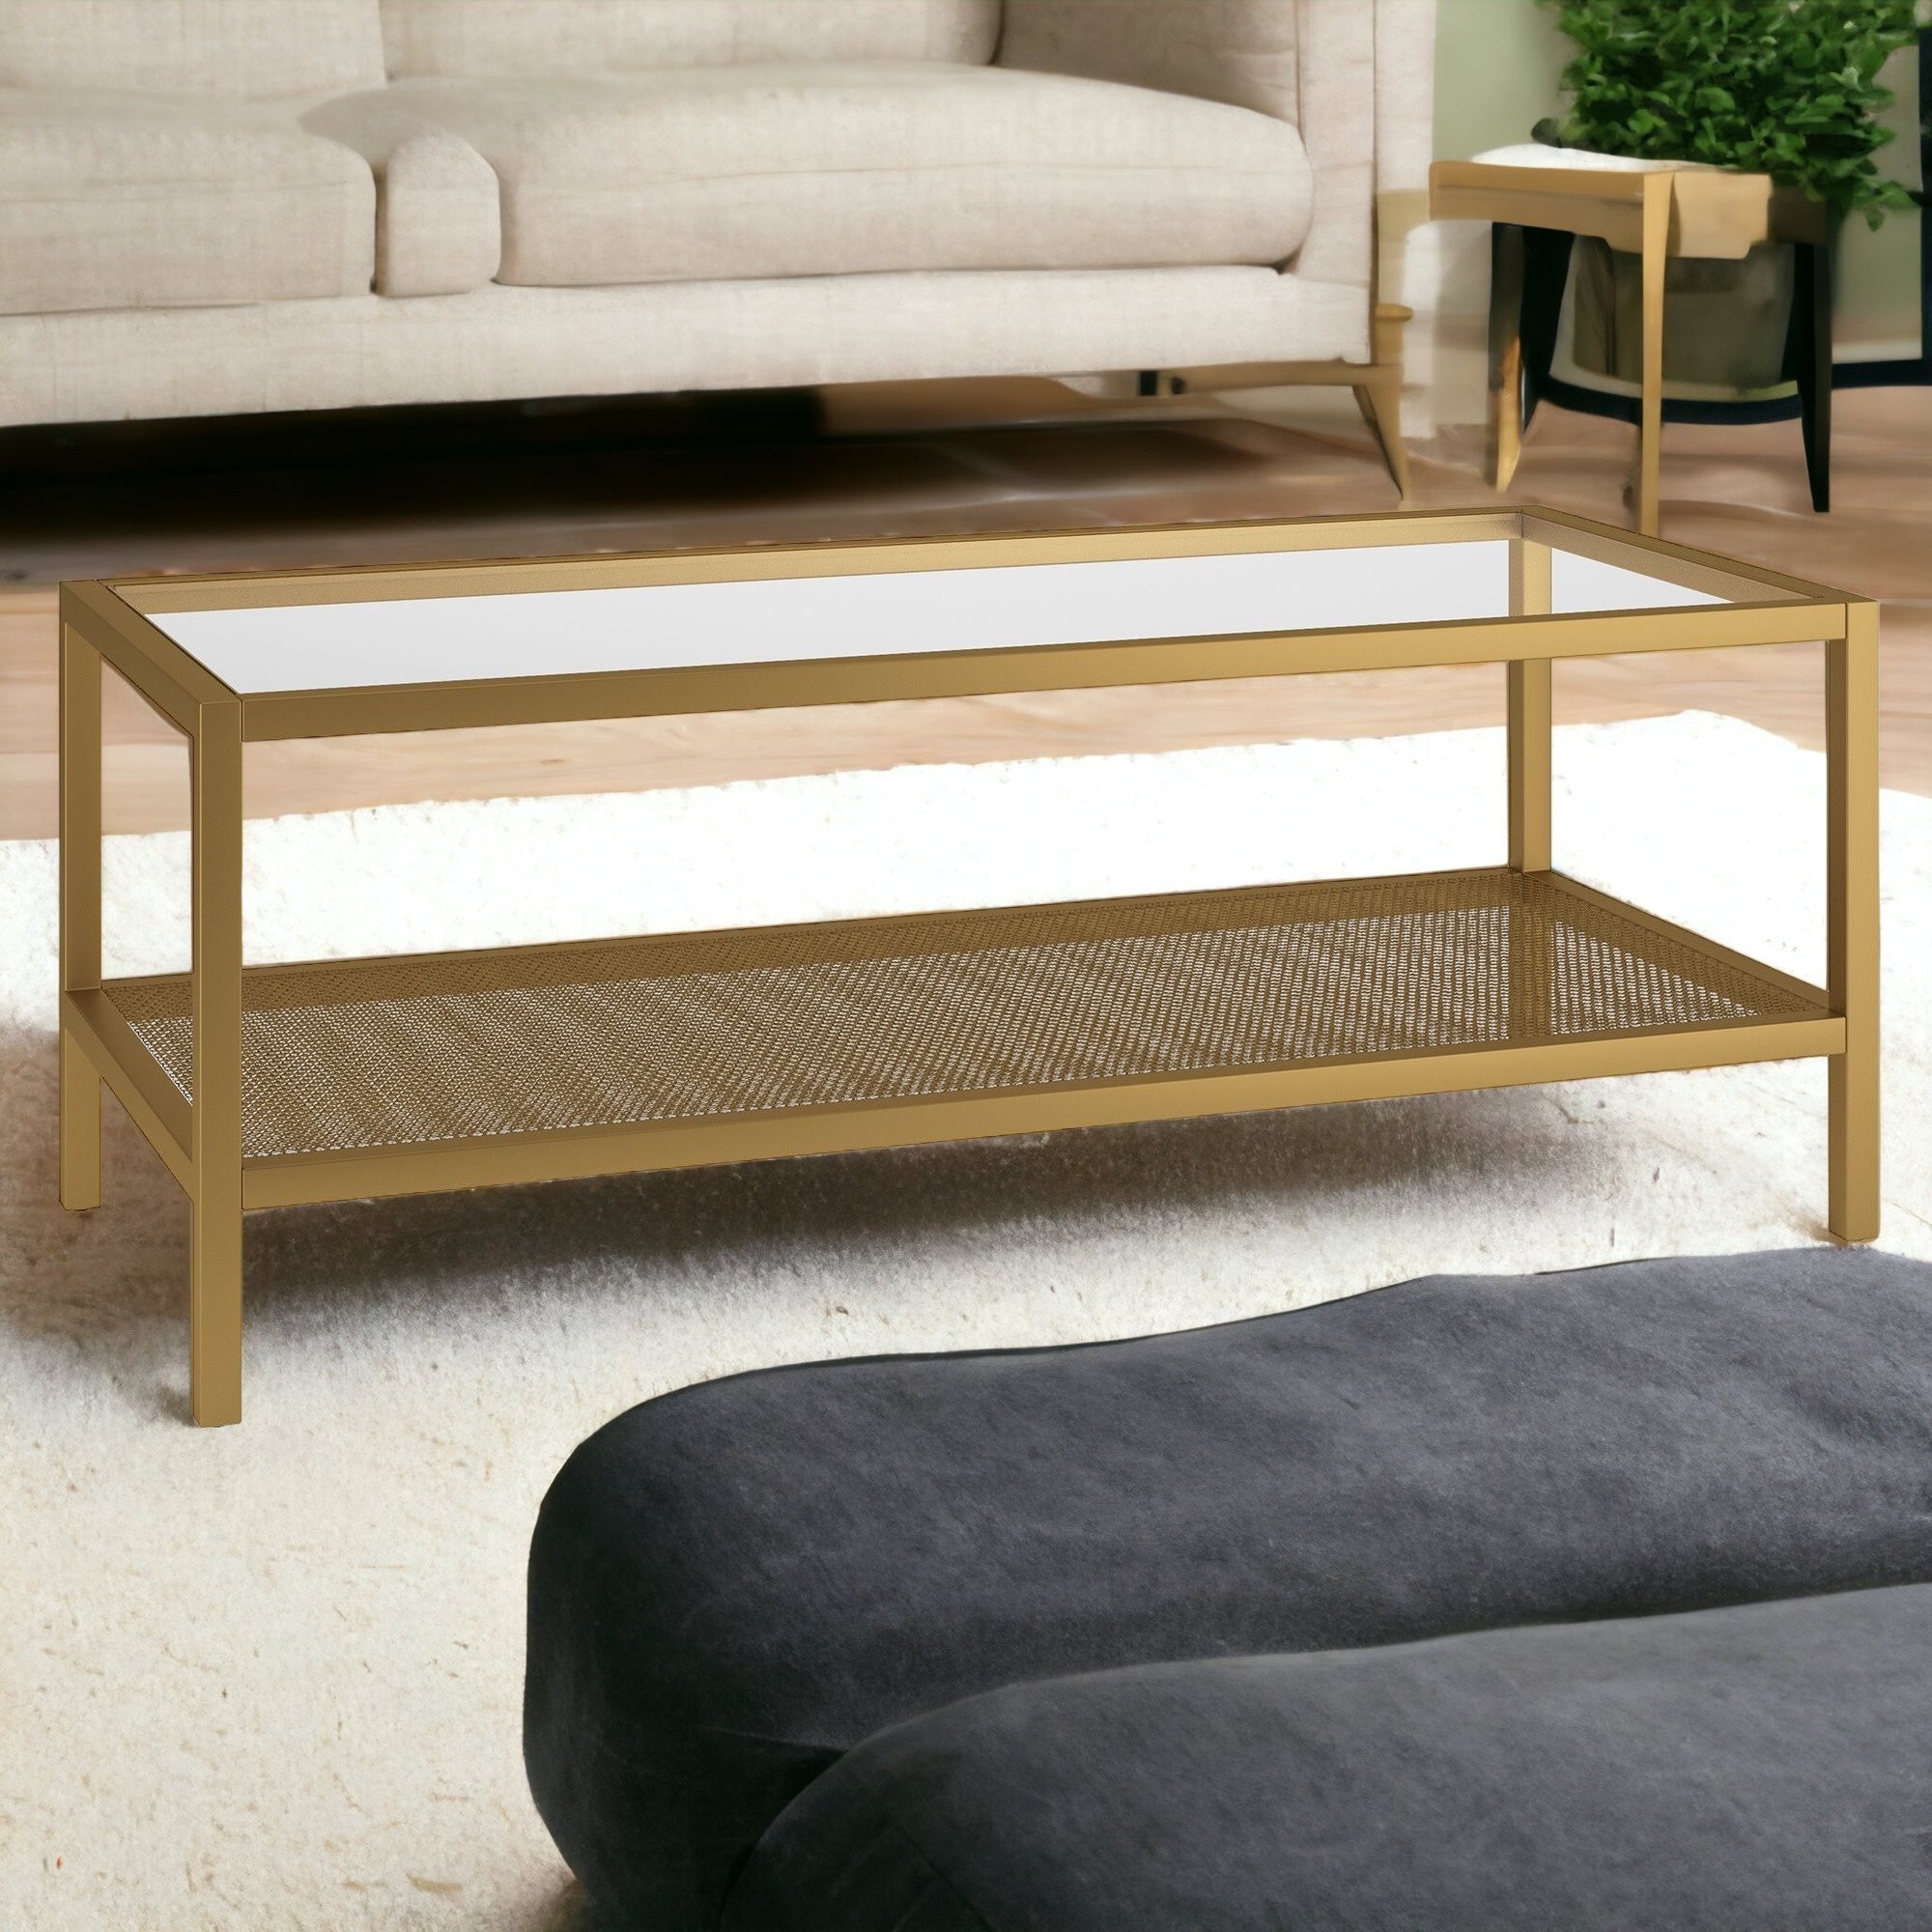 45" Gold Glass And Steel Coffee Table With Shelf